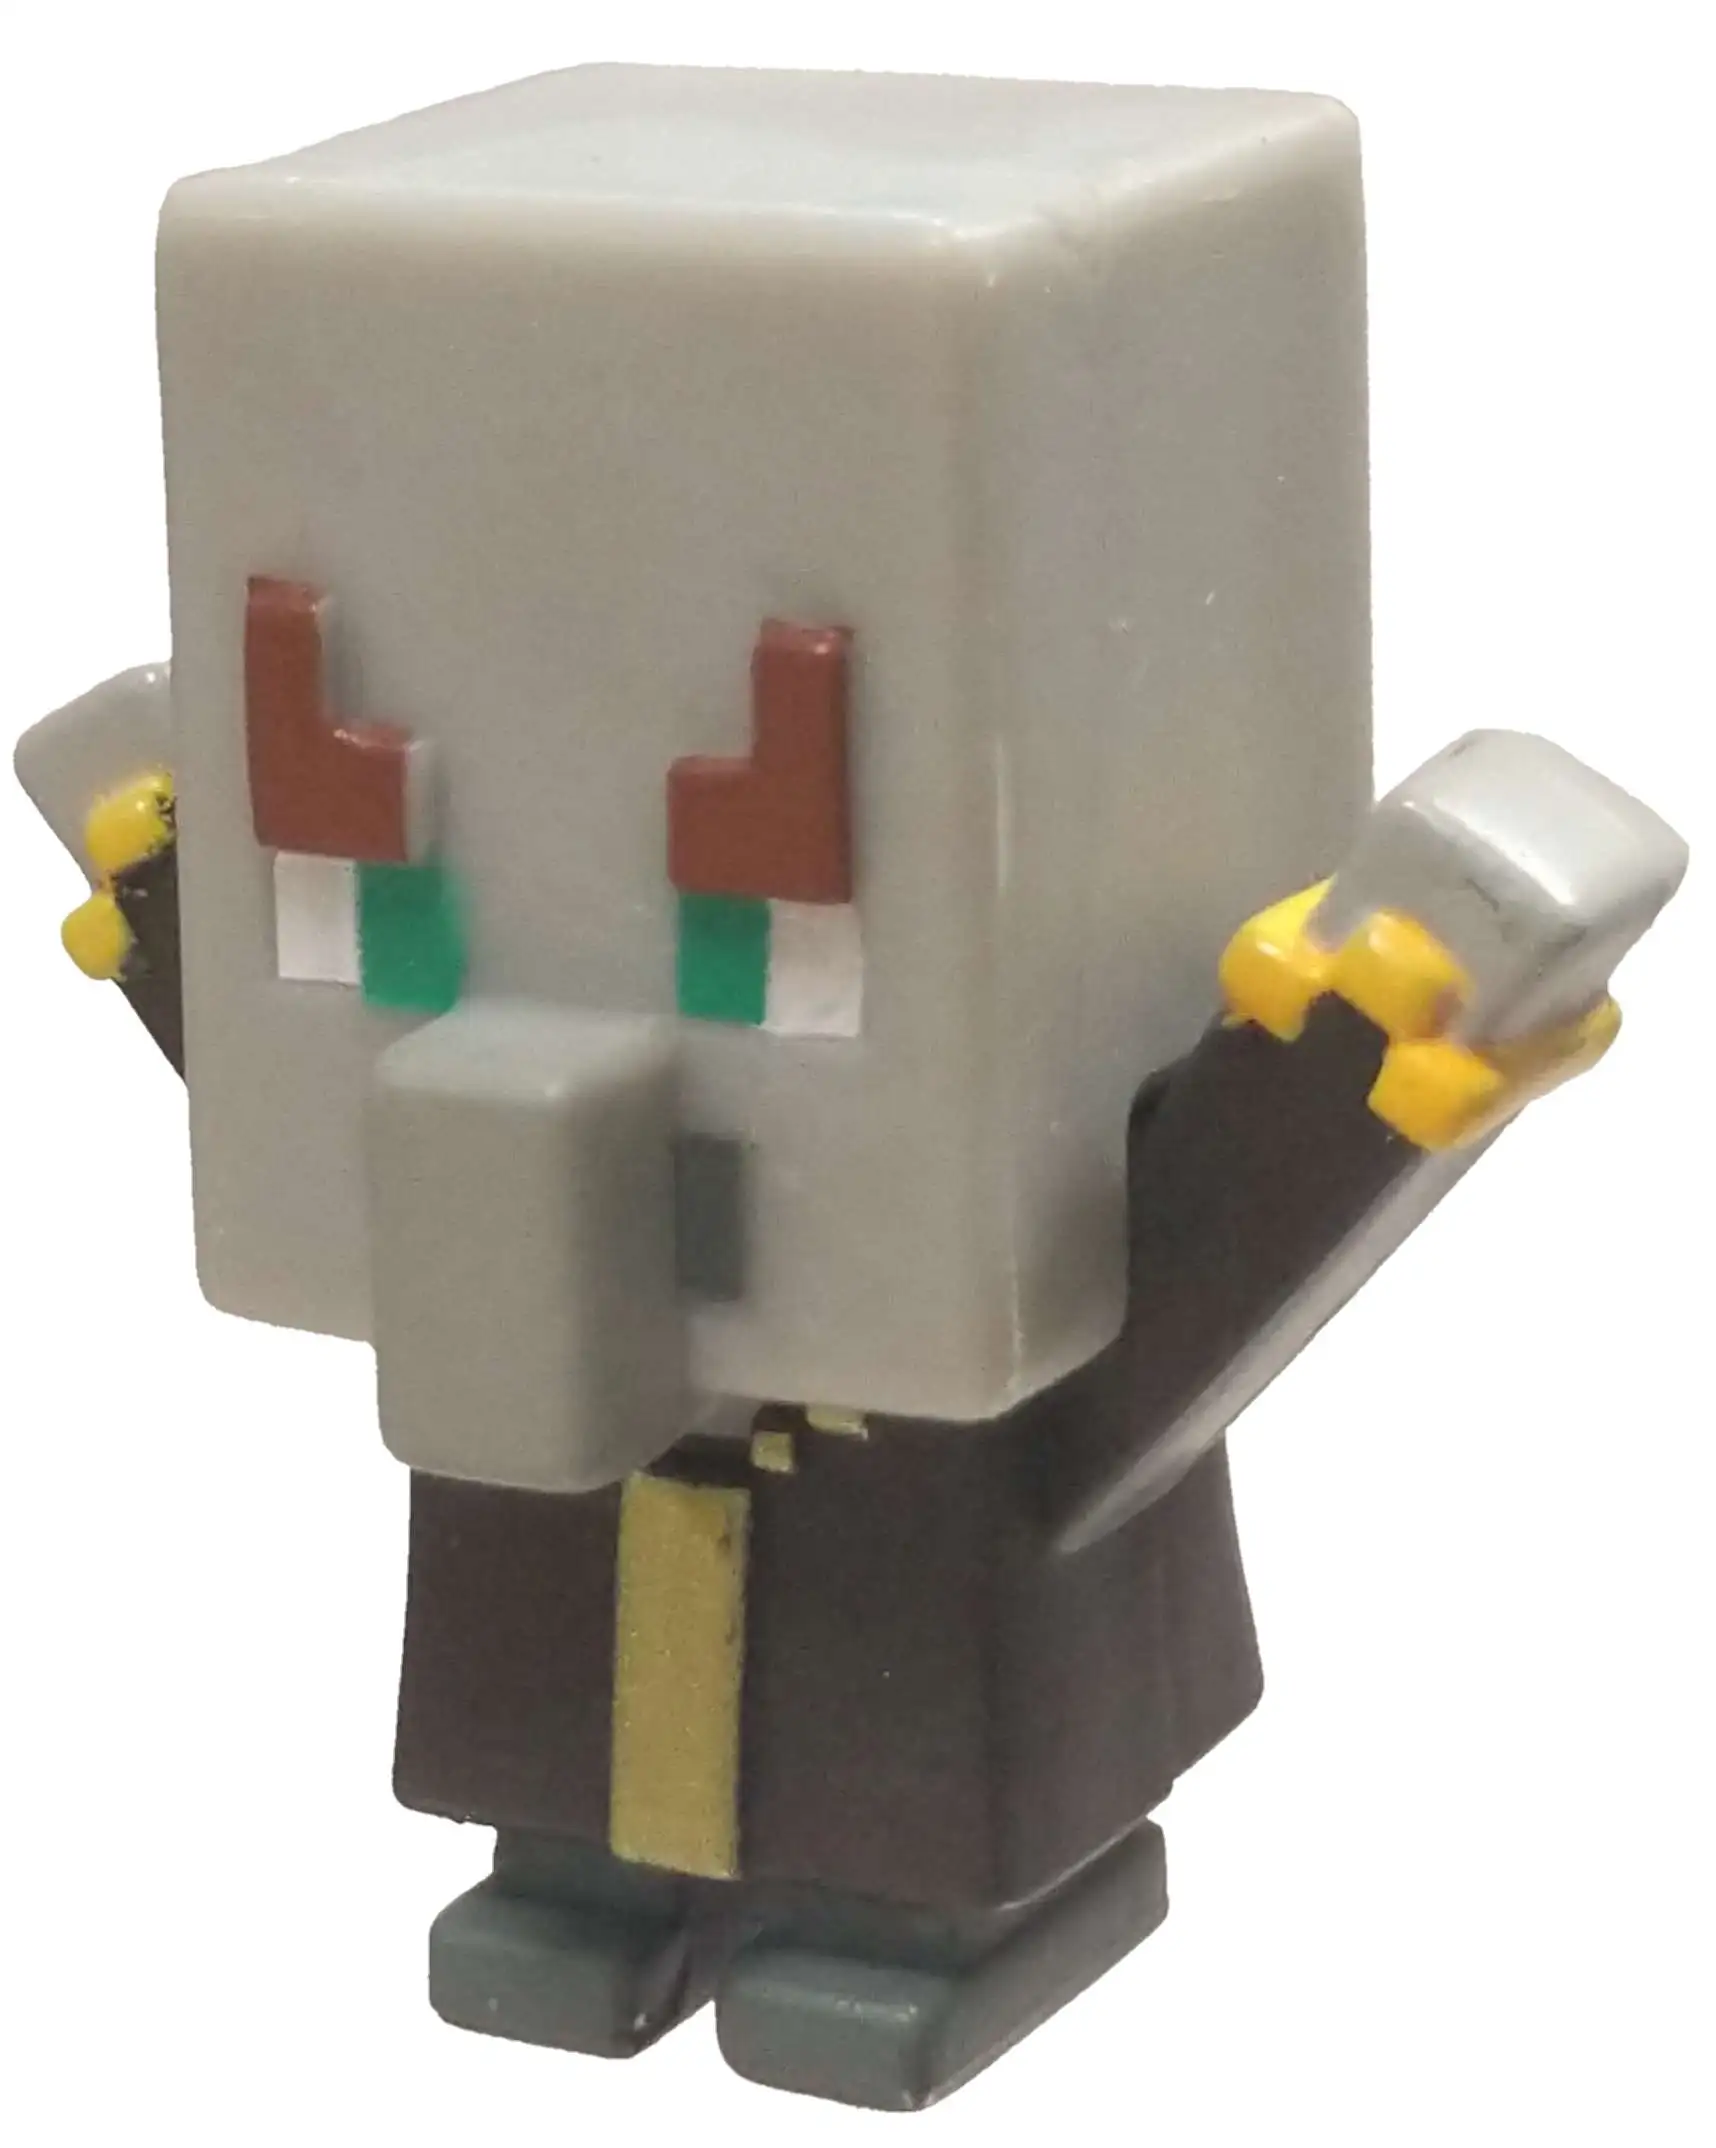 2020 Minecraft Dungeons Series 24 Minifigure Ender Chest Loose